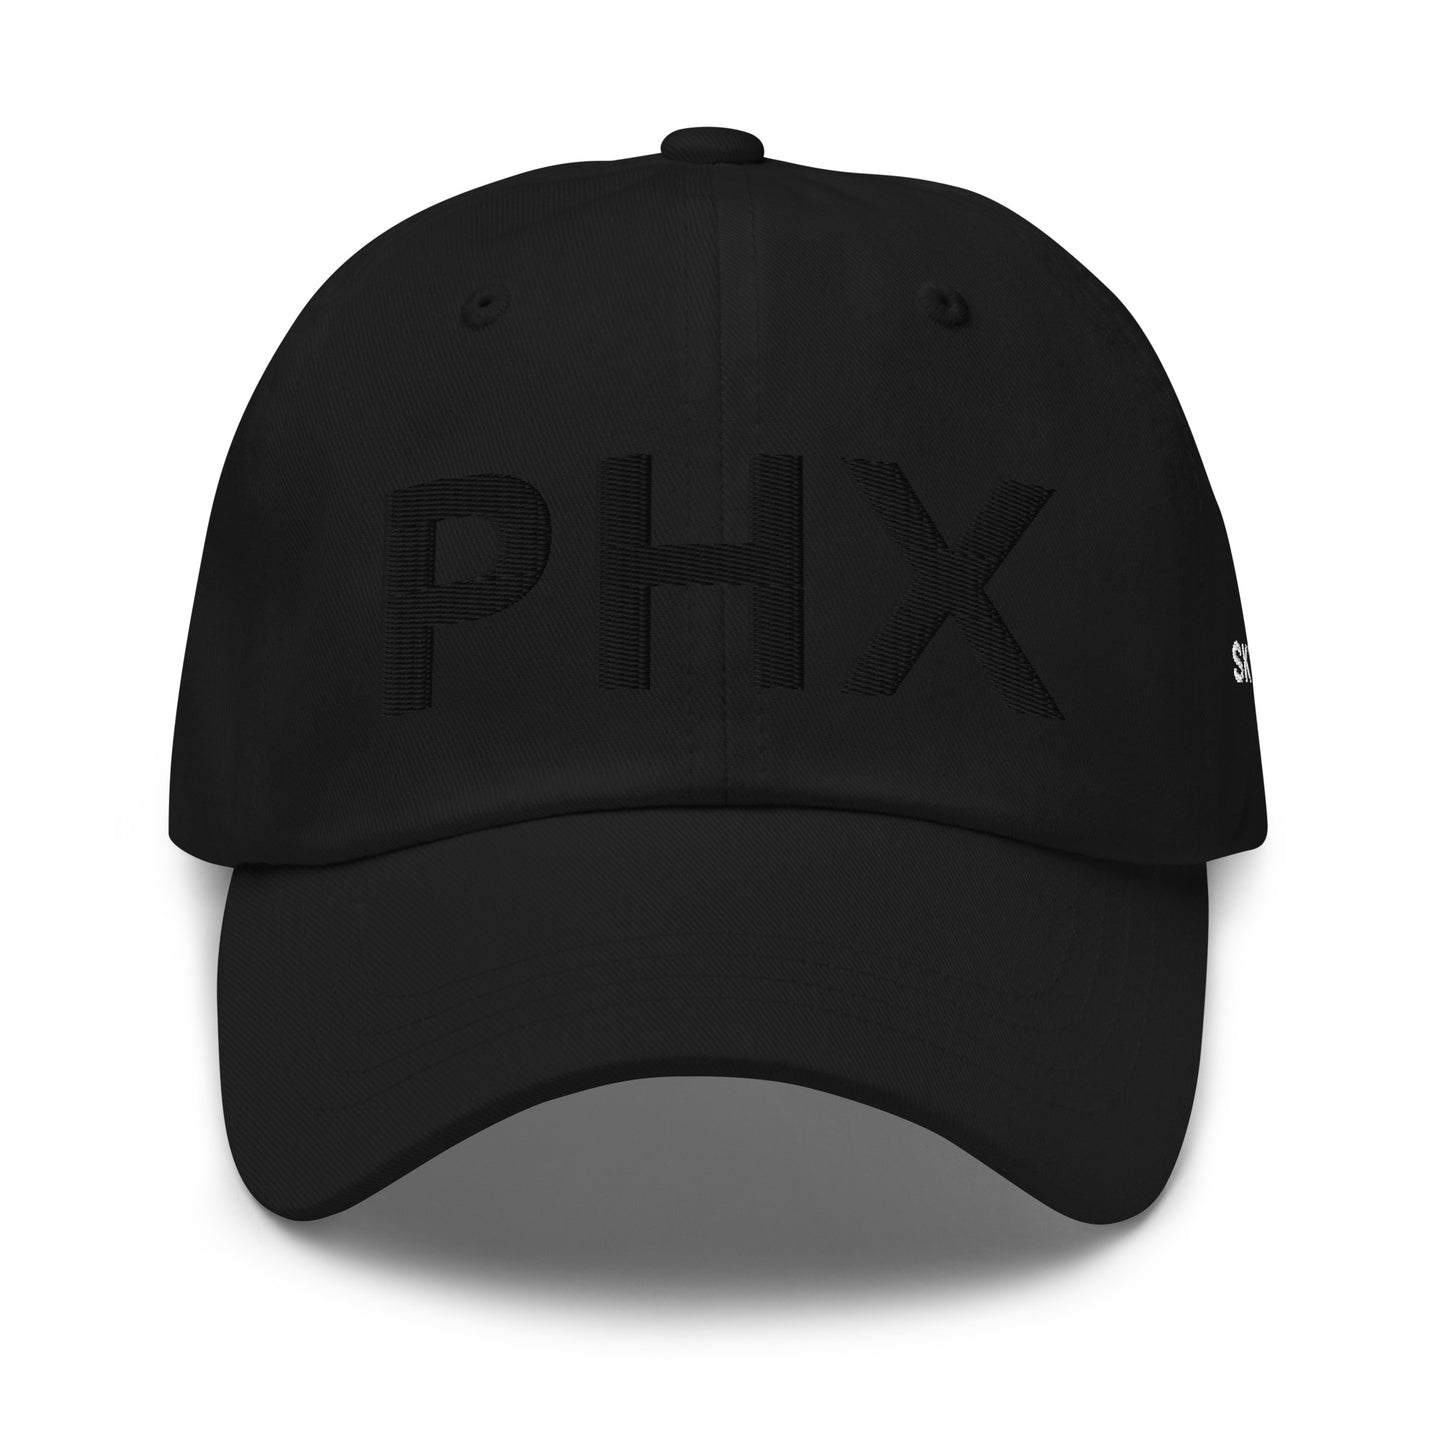 Dad Hat - "Ghost" PHX w/ Sky Ops Live Signature Logo on Left Side